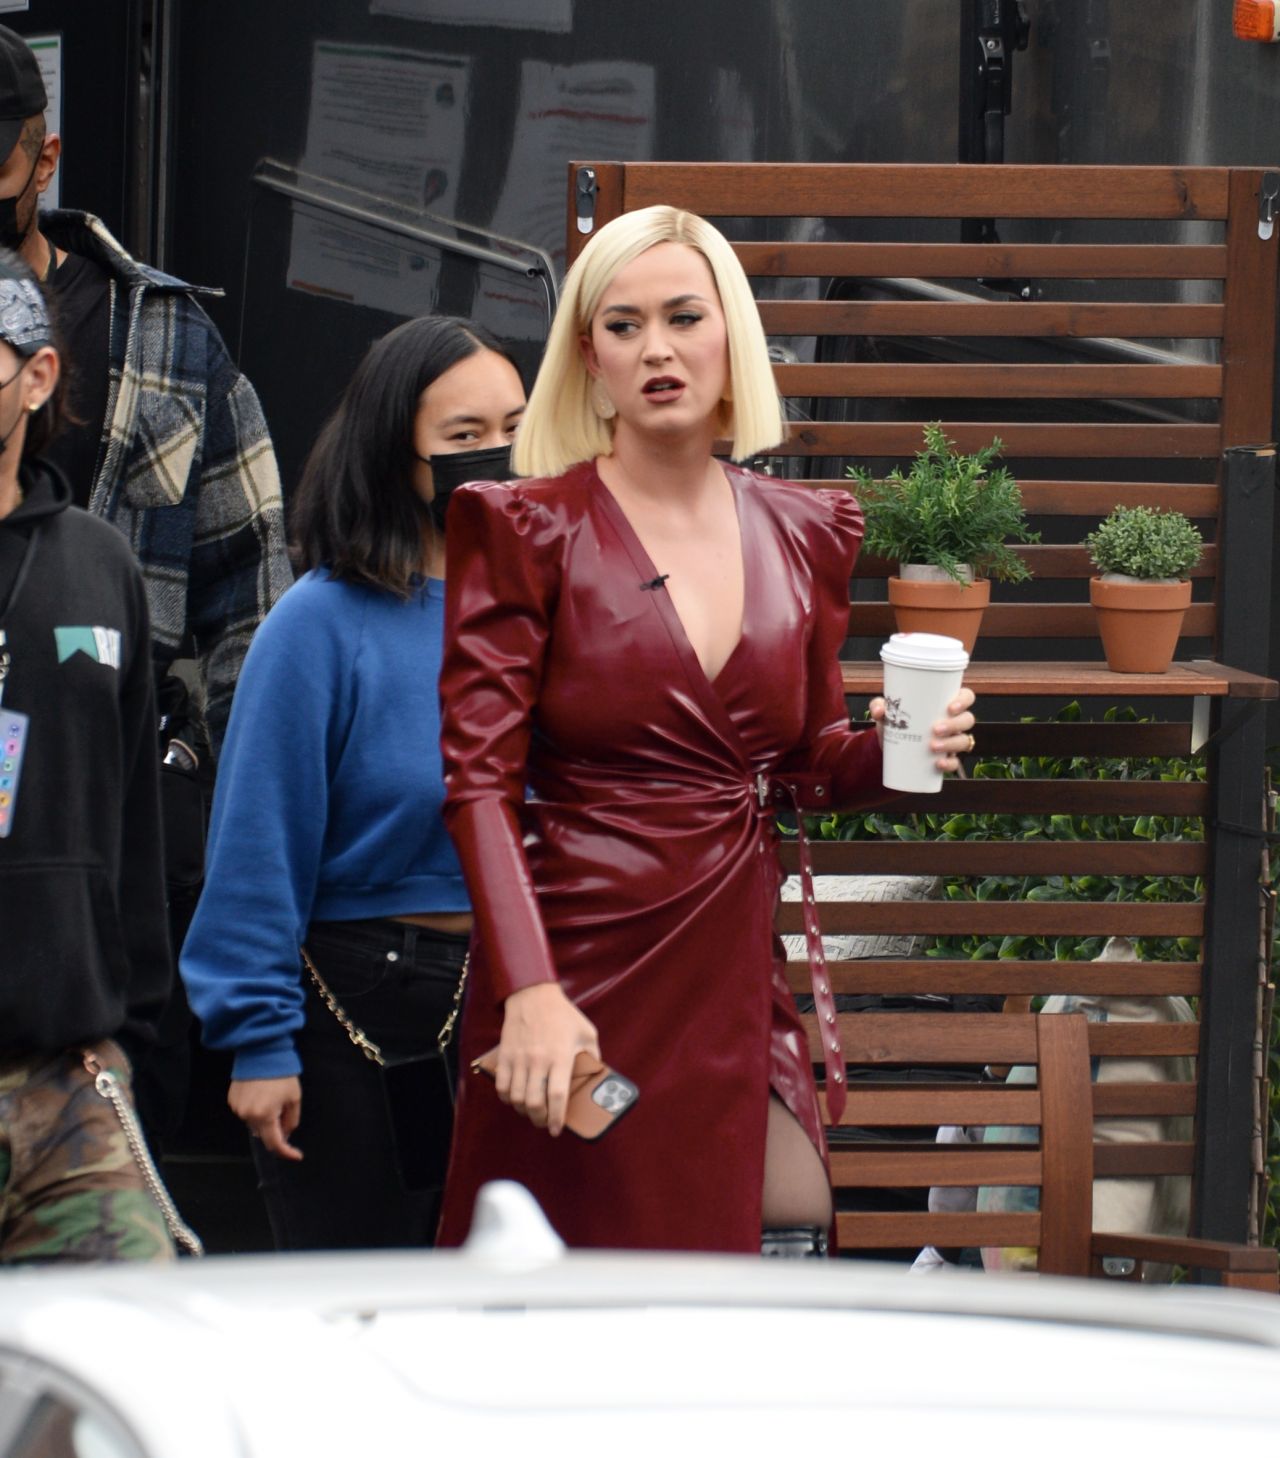 Katy Perry In A Red Leather Outfit American Idol Show In La 05 16 2021 Celebmafia